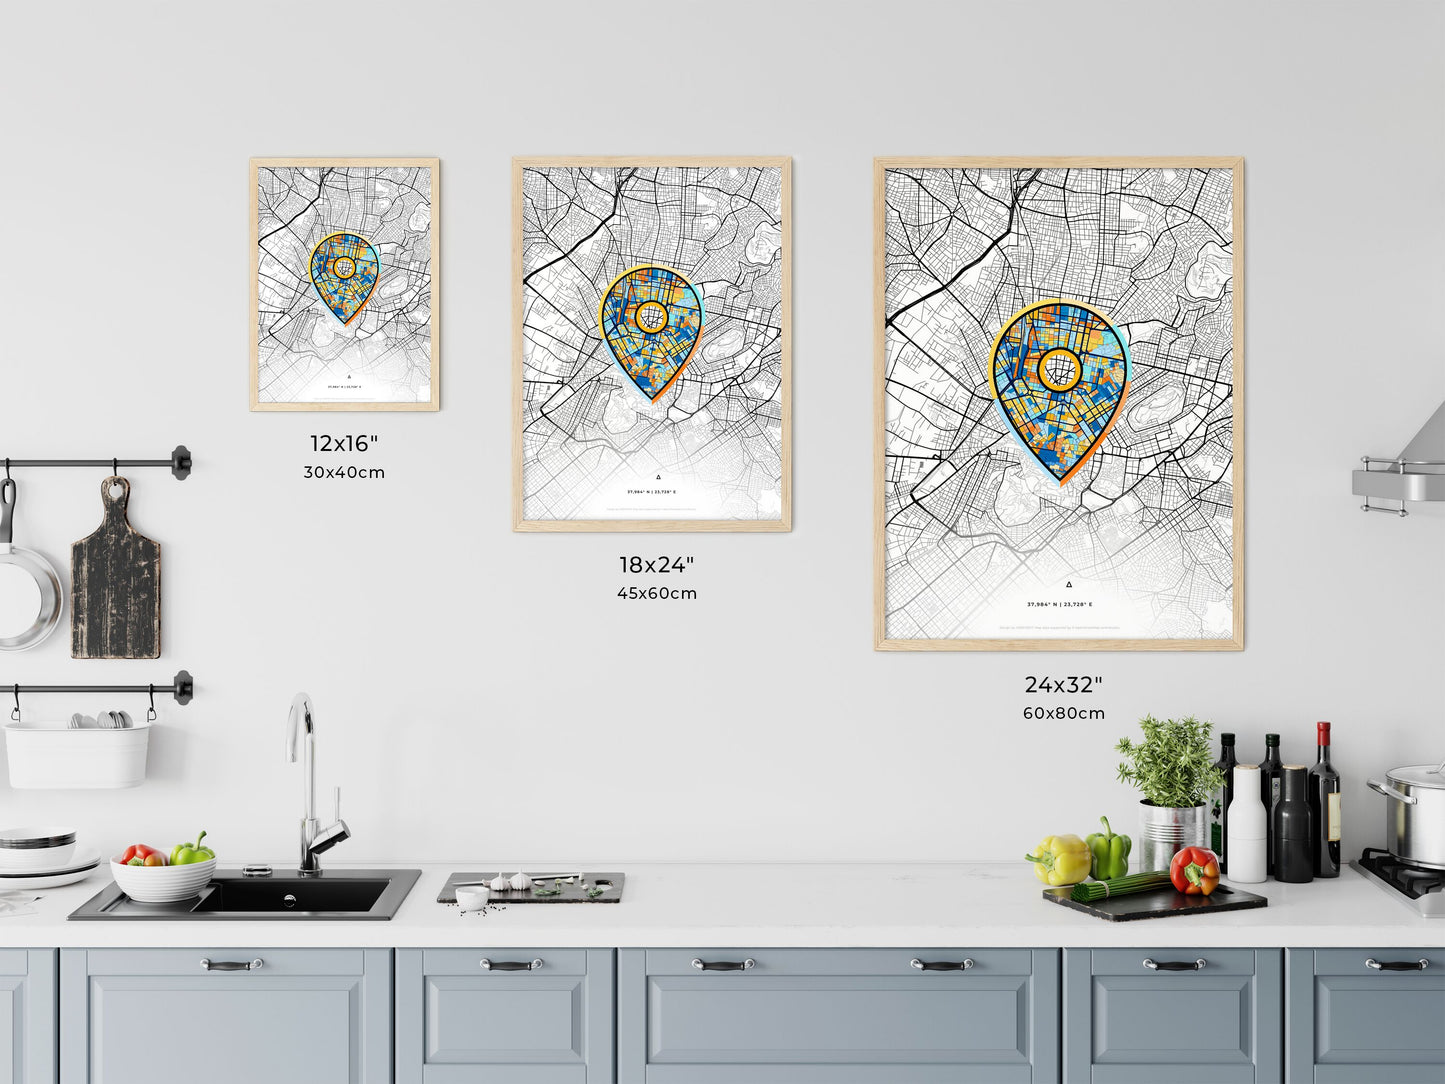 ATHENS GREECE minimal art map with a colorful icon. Where it all began, Couple map gift.